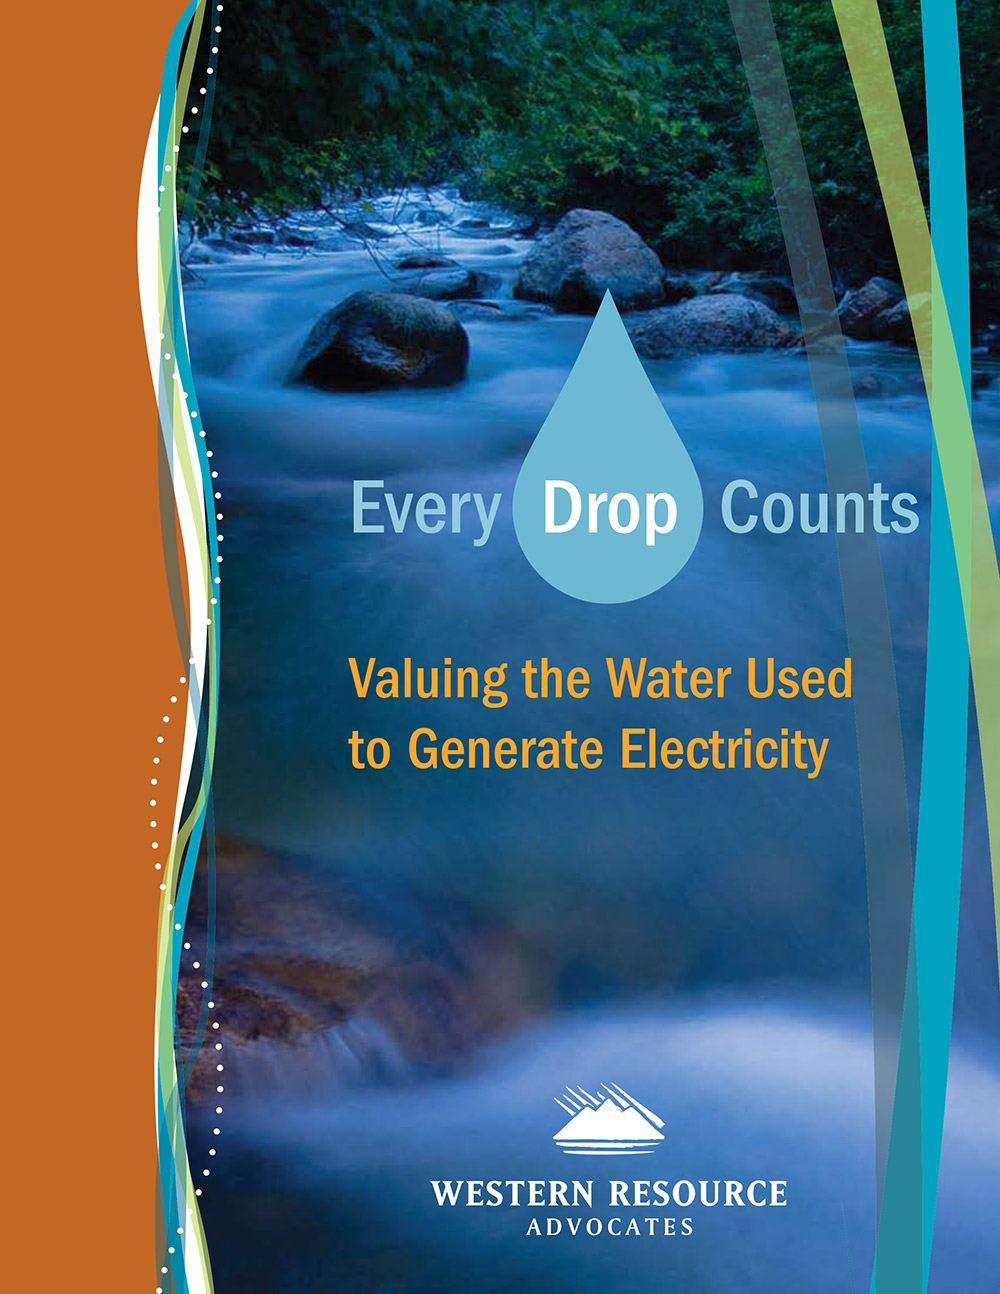 Every Drop Counts Report